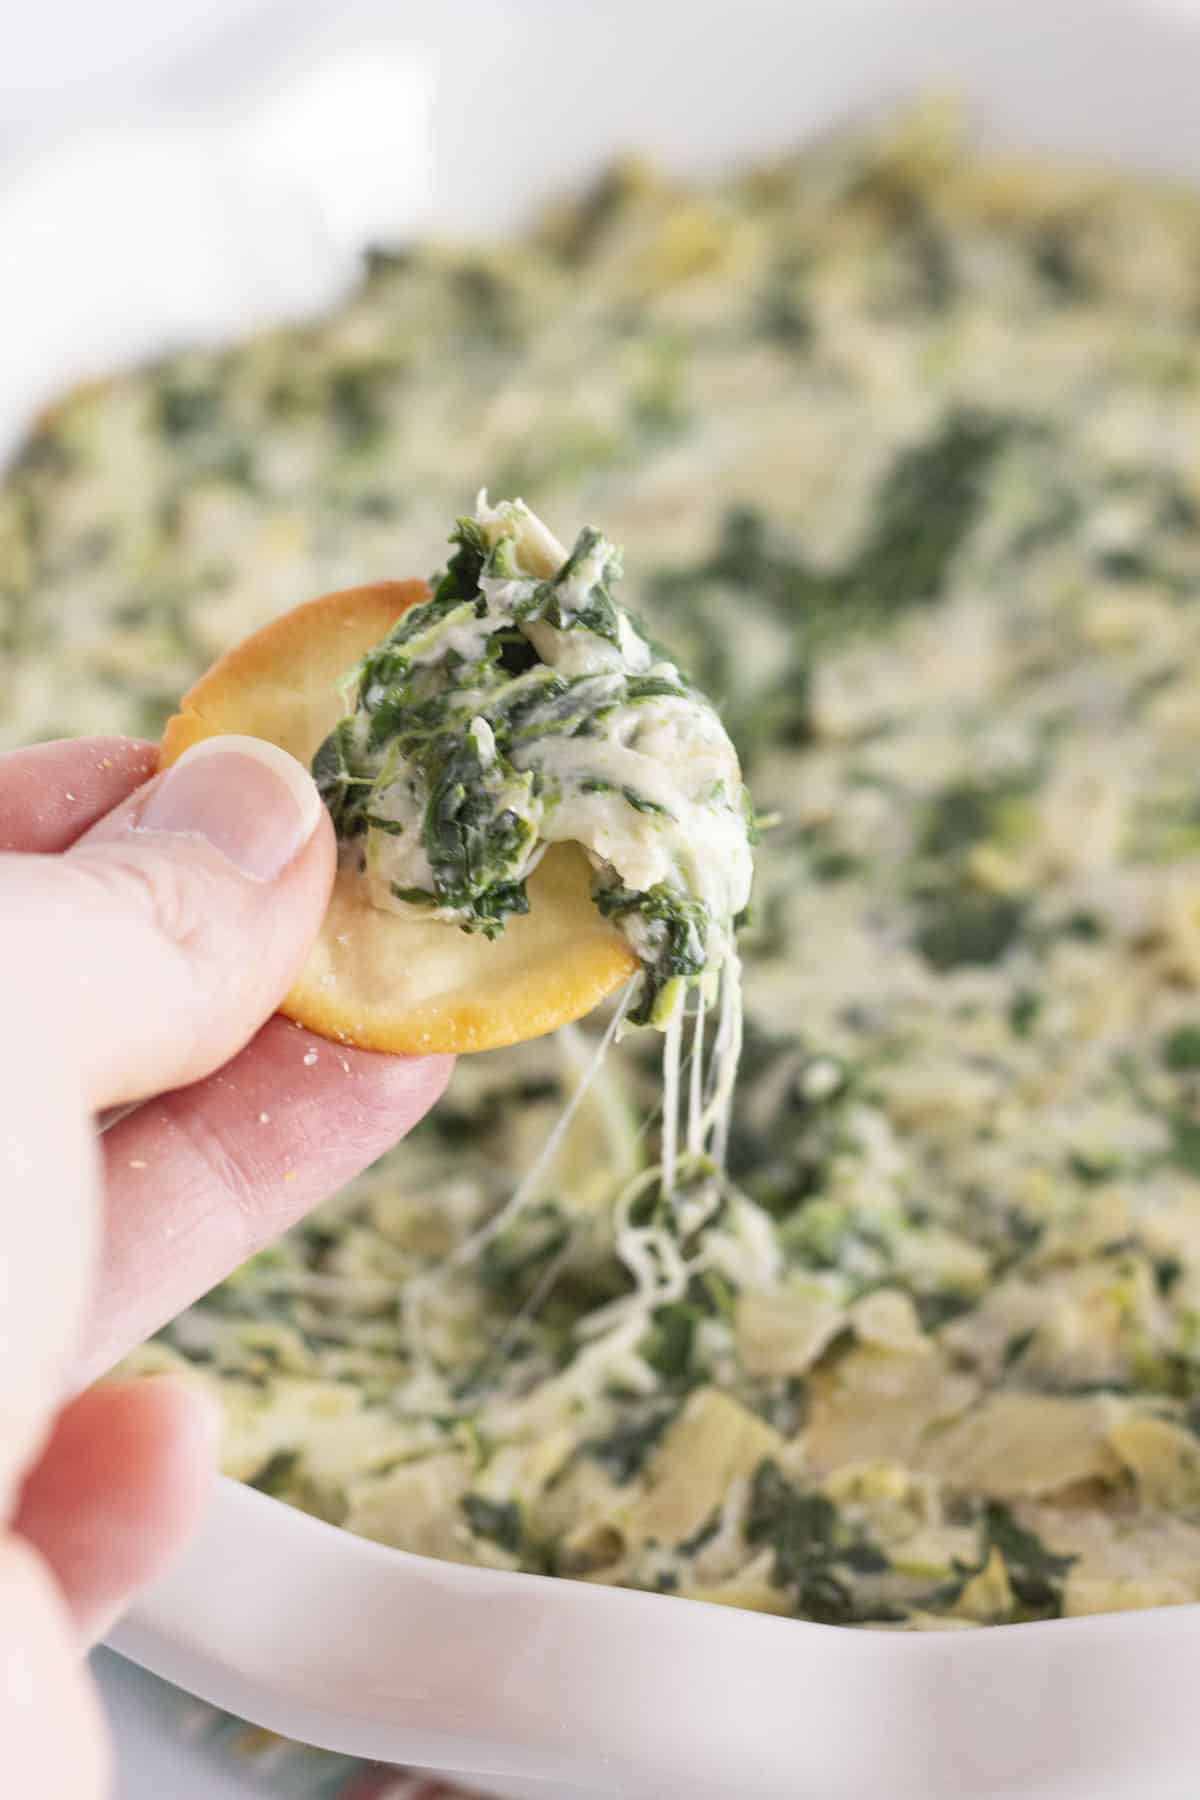 Taking a scoop of spinach and artichoke dip without mayo.